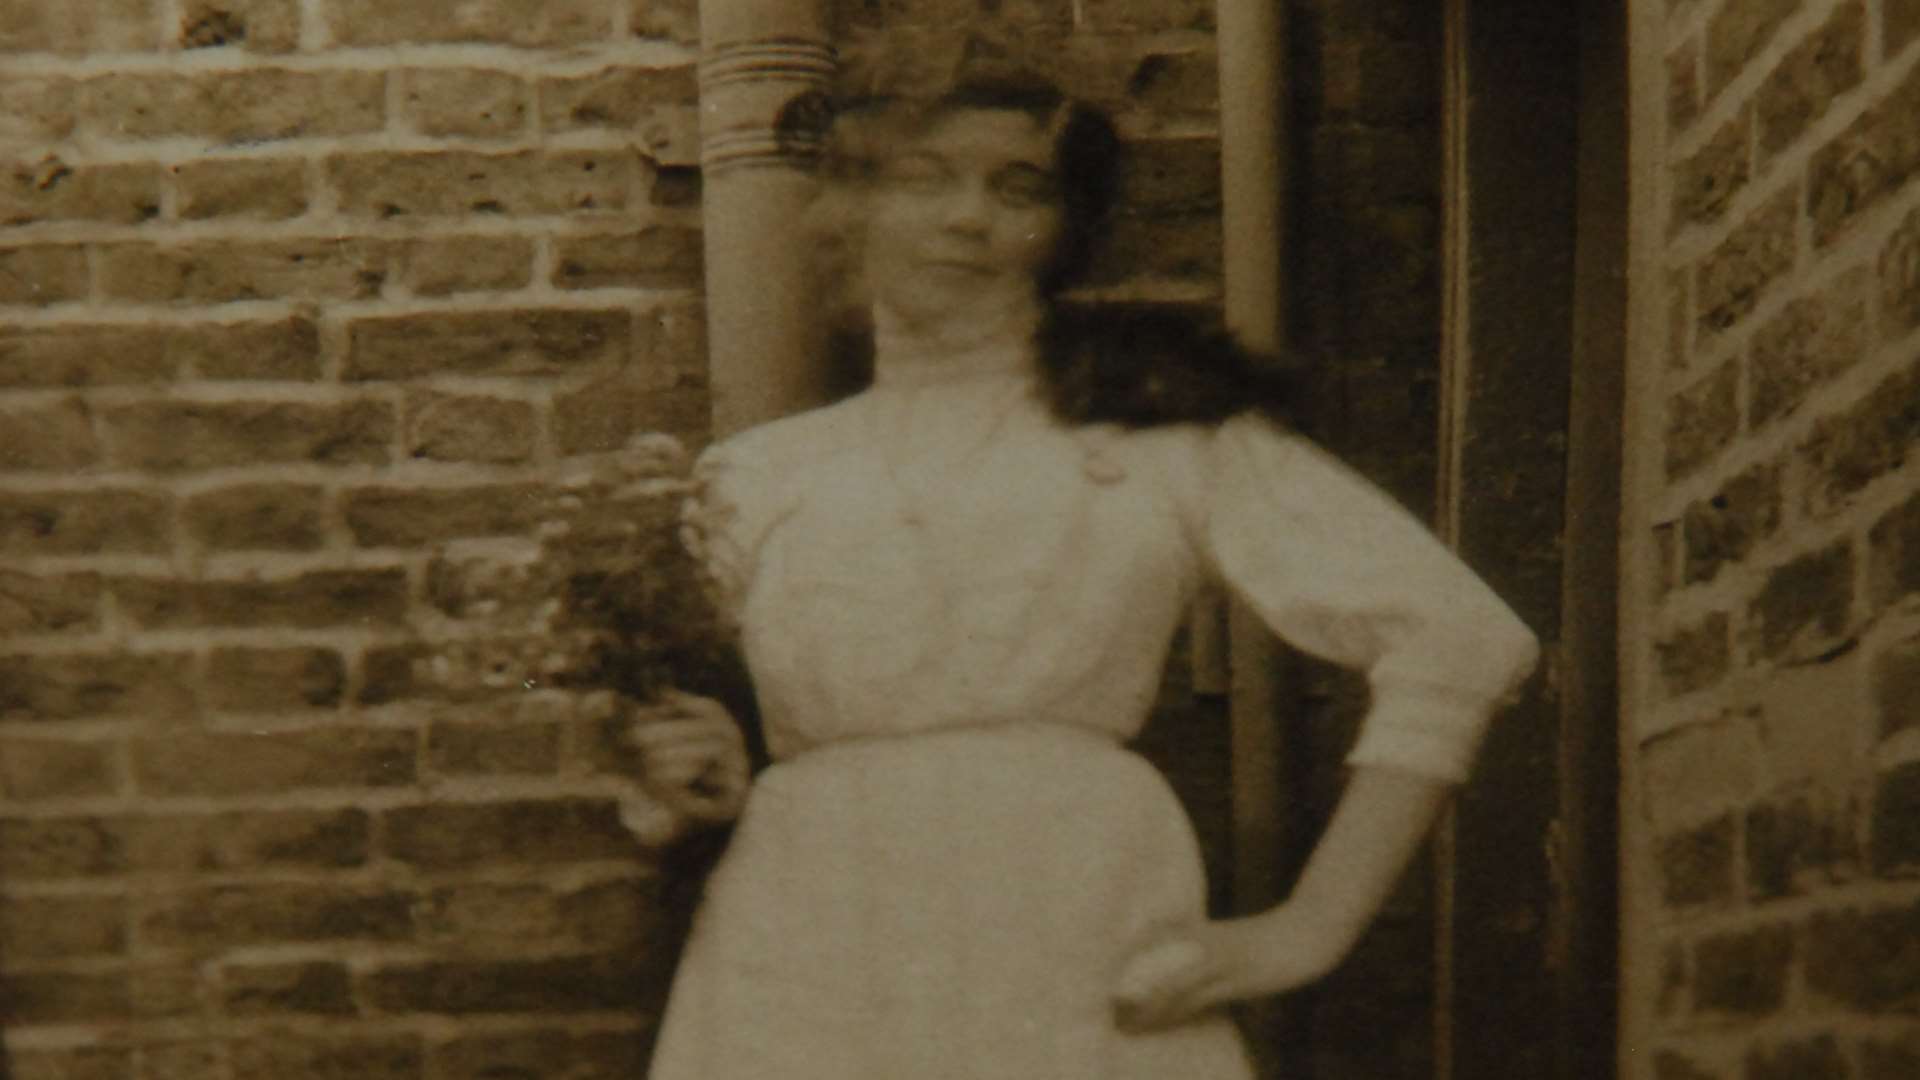 Elsie Garlinge as a young woman in her 20s